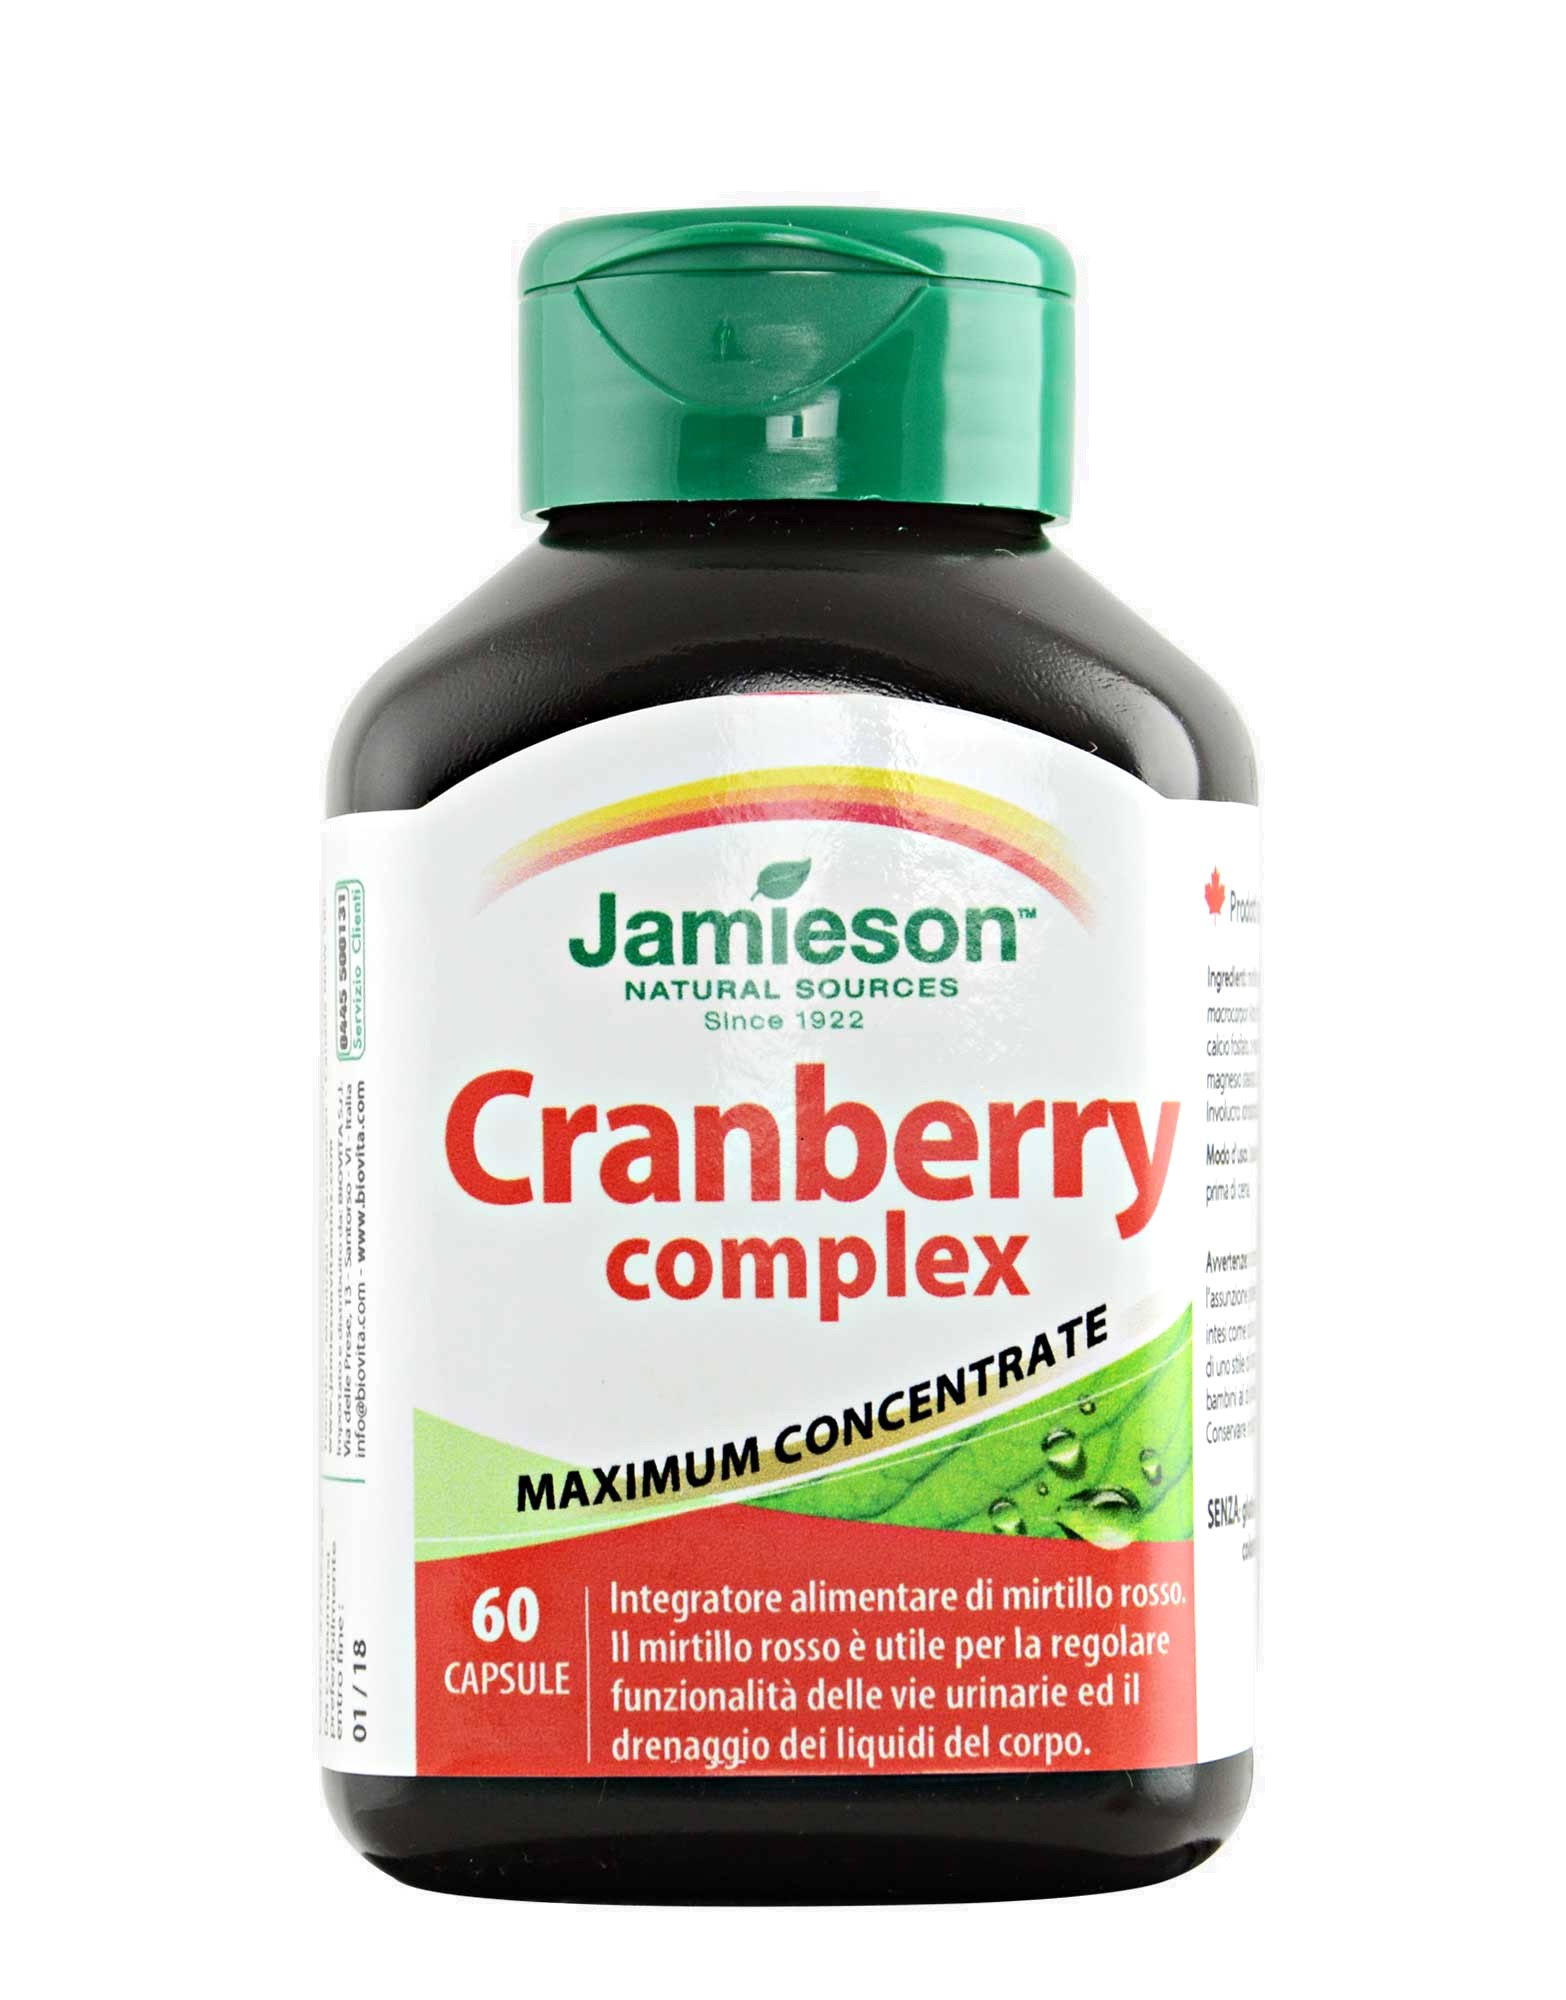 Jamieson Maximum Concentrate Cranberry Complex Dietary Supplement - 60ct